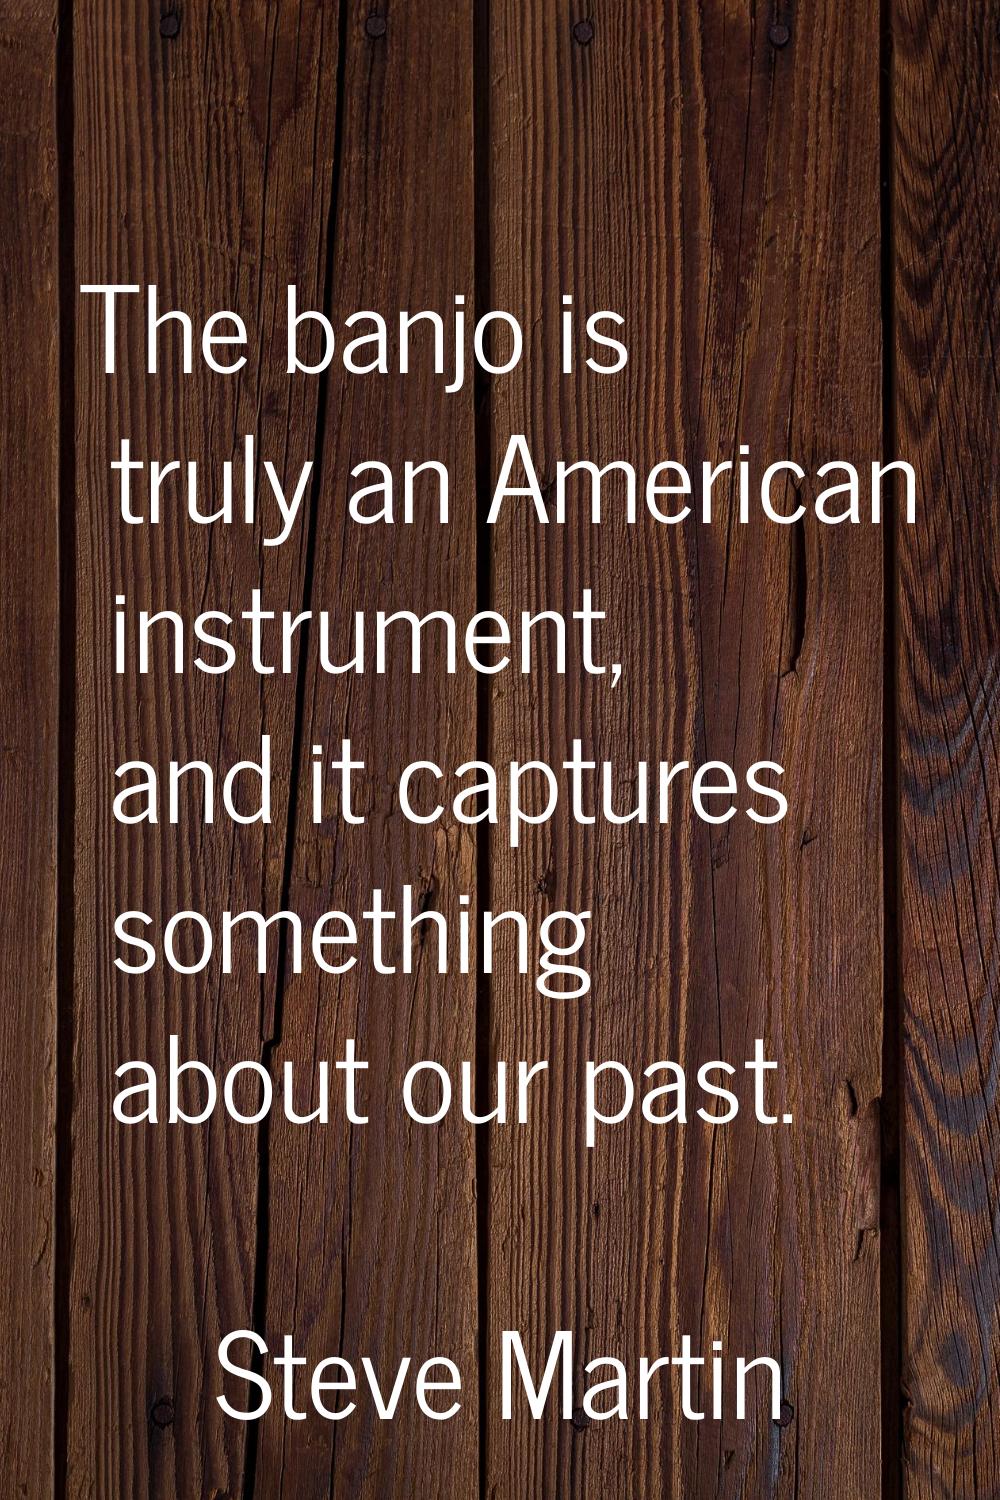 The banjo is truly an American instrument, and it captures something about our past.